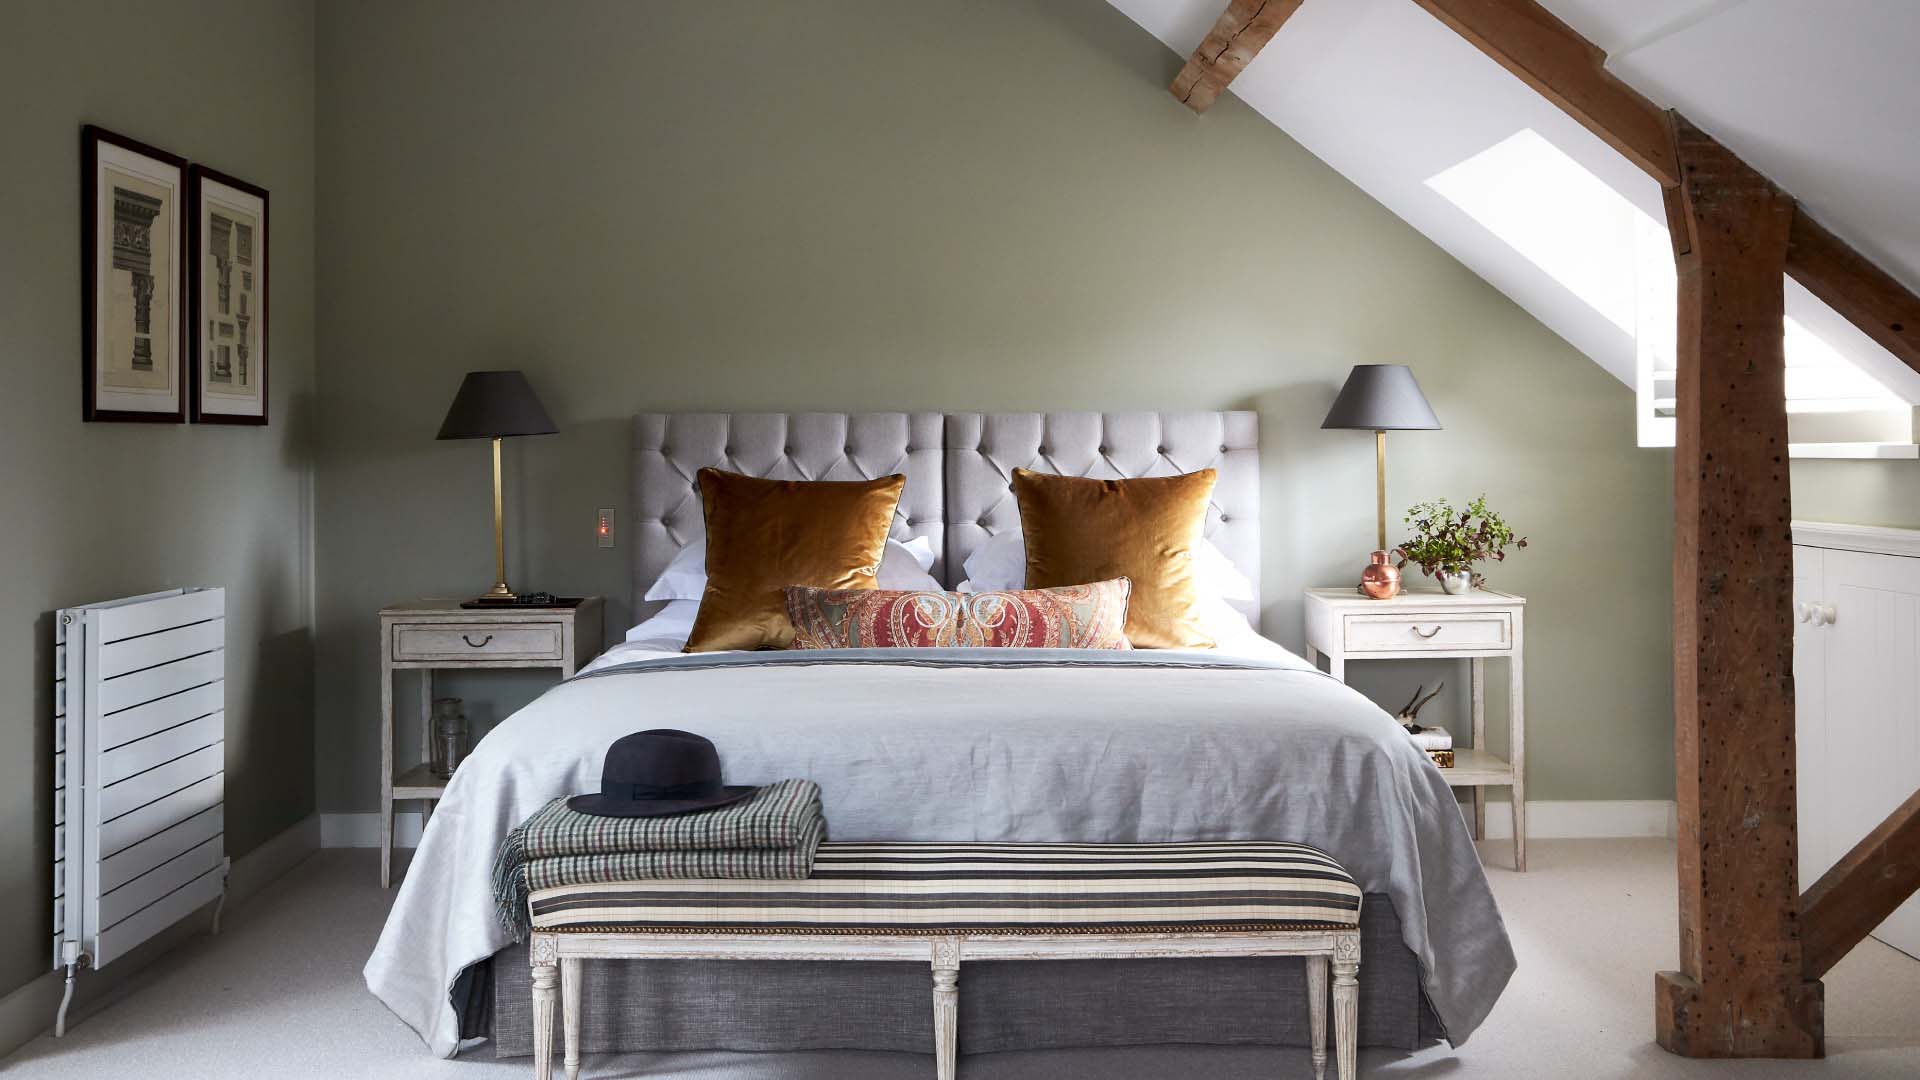 Restful bedroom with natural charm by K&H Design, using Farrow & Ball paint